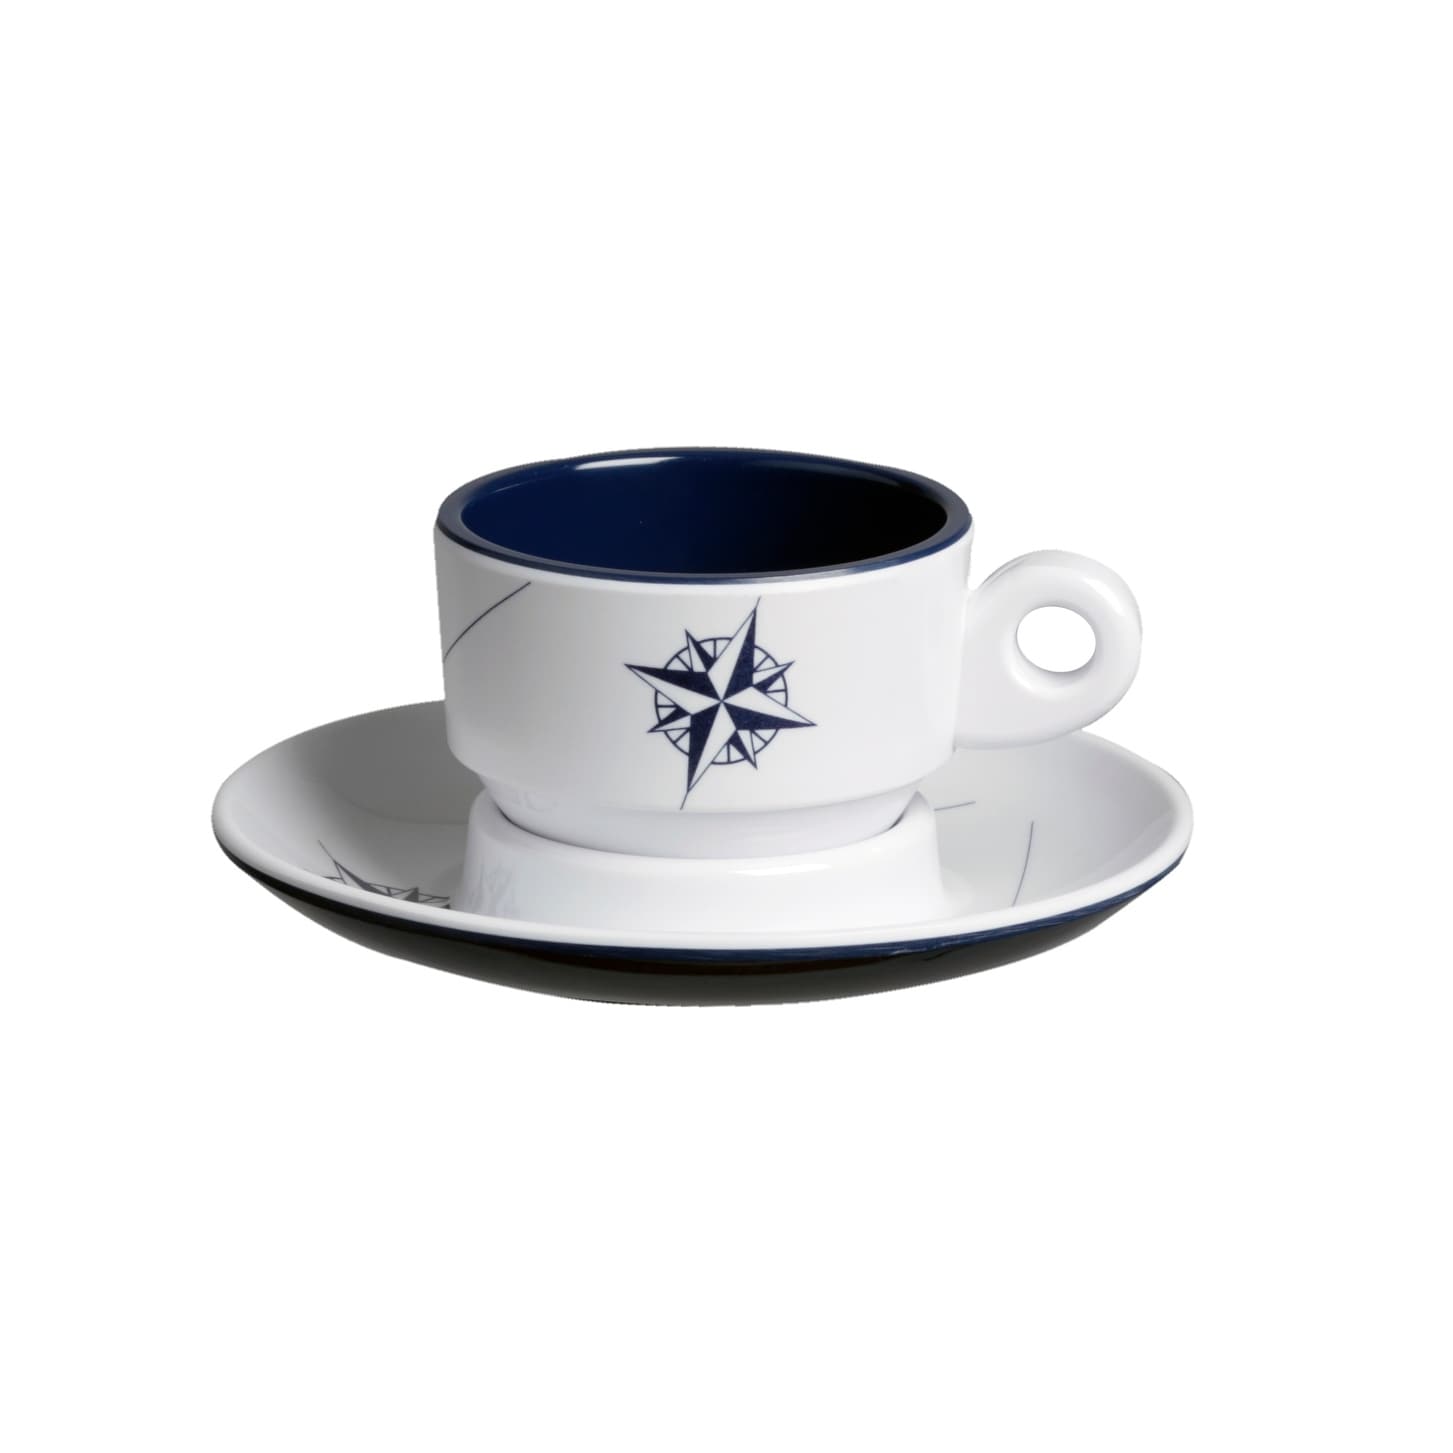 https://ak1.ostkcdn.com/images/products/is/images/direct/7de4ea7e9ab11bc928b9b677a4a5c9cec77cf395/Northwind-Espresso-Cup-%26-Saucer---Service-for-6.jpg